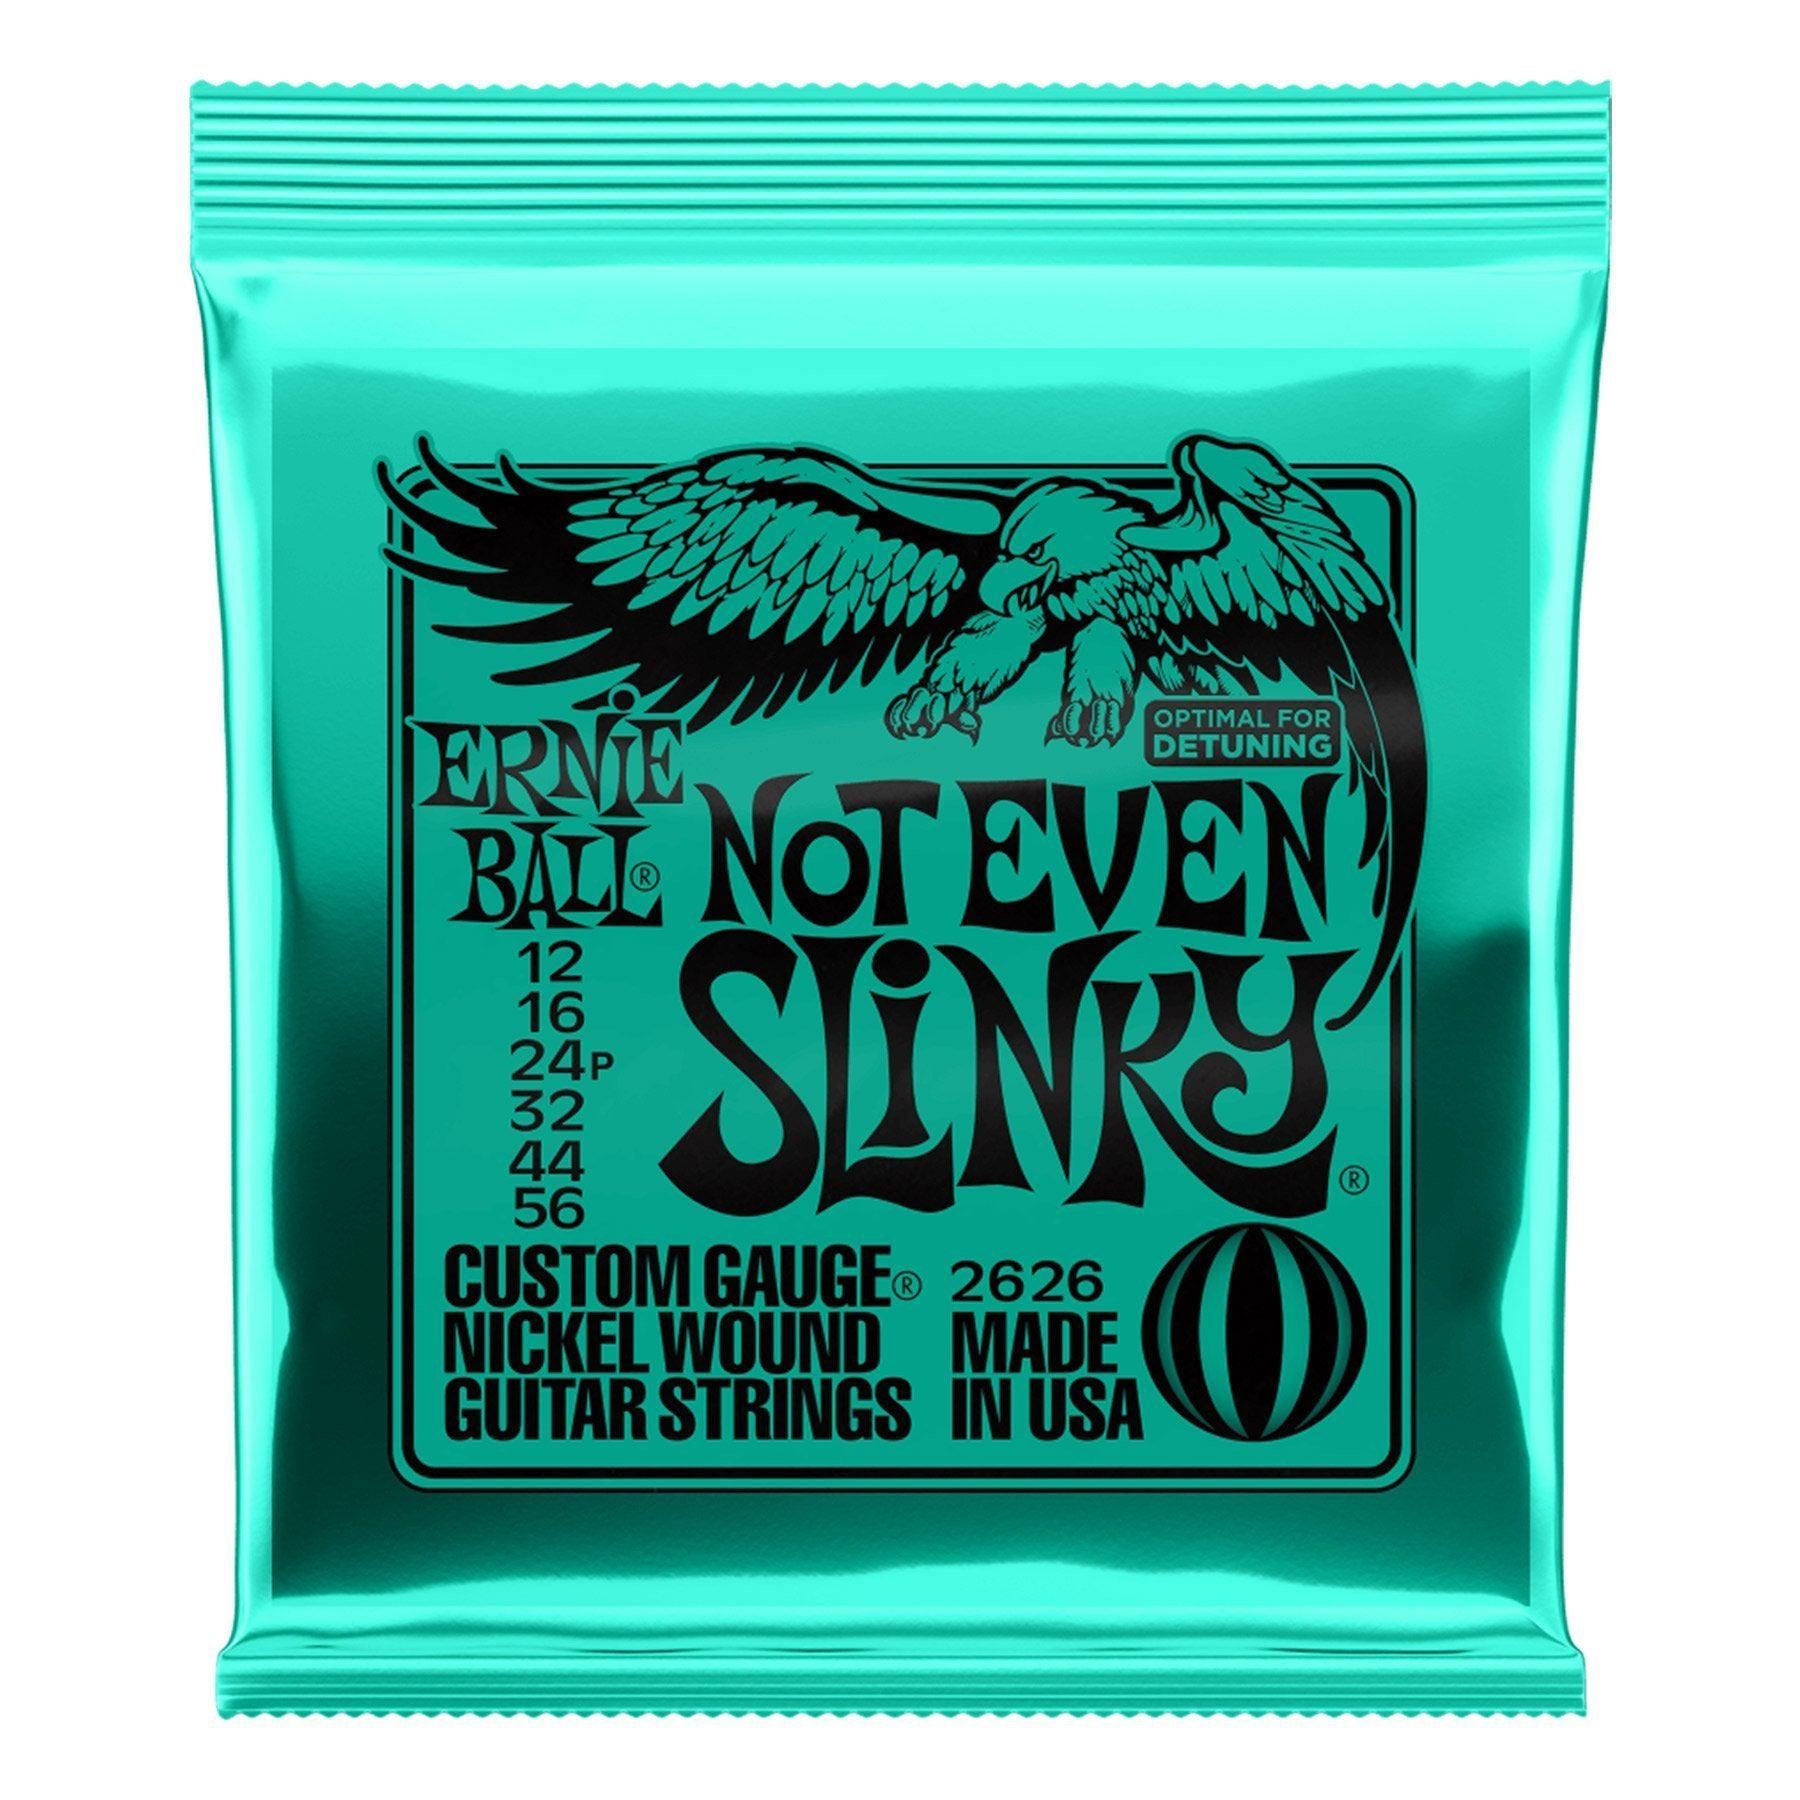 Ernie Ball 2626 Not Even Slinky Nickel Wound Electric Guitar Strings (12-56)-2626